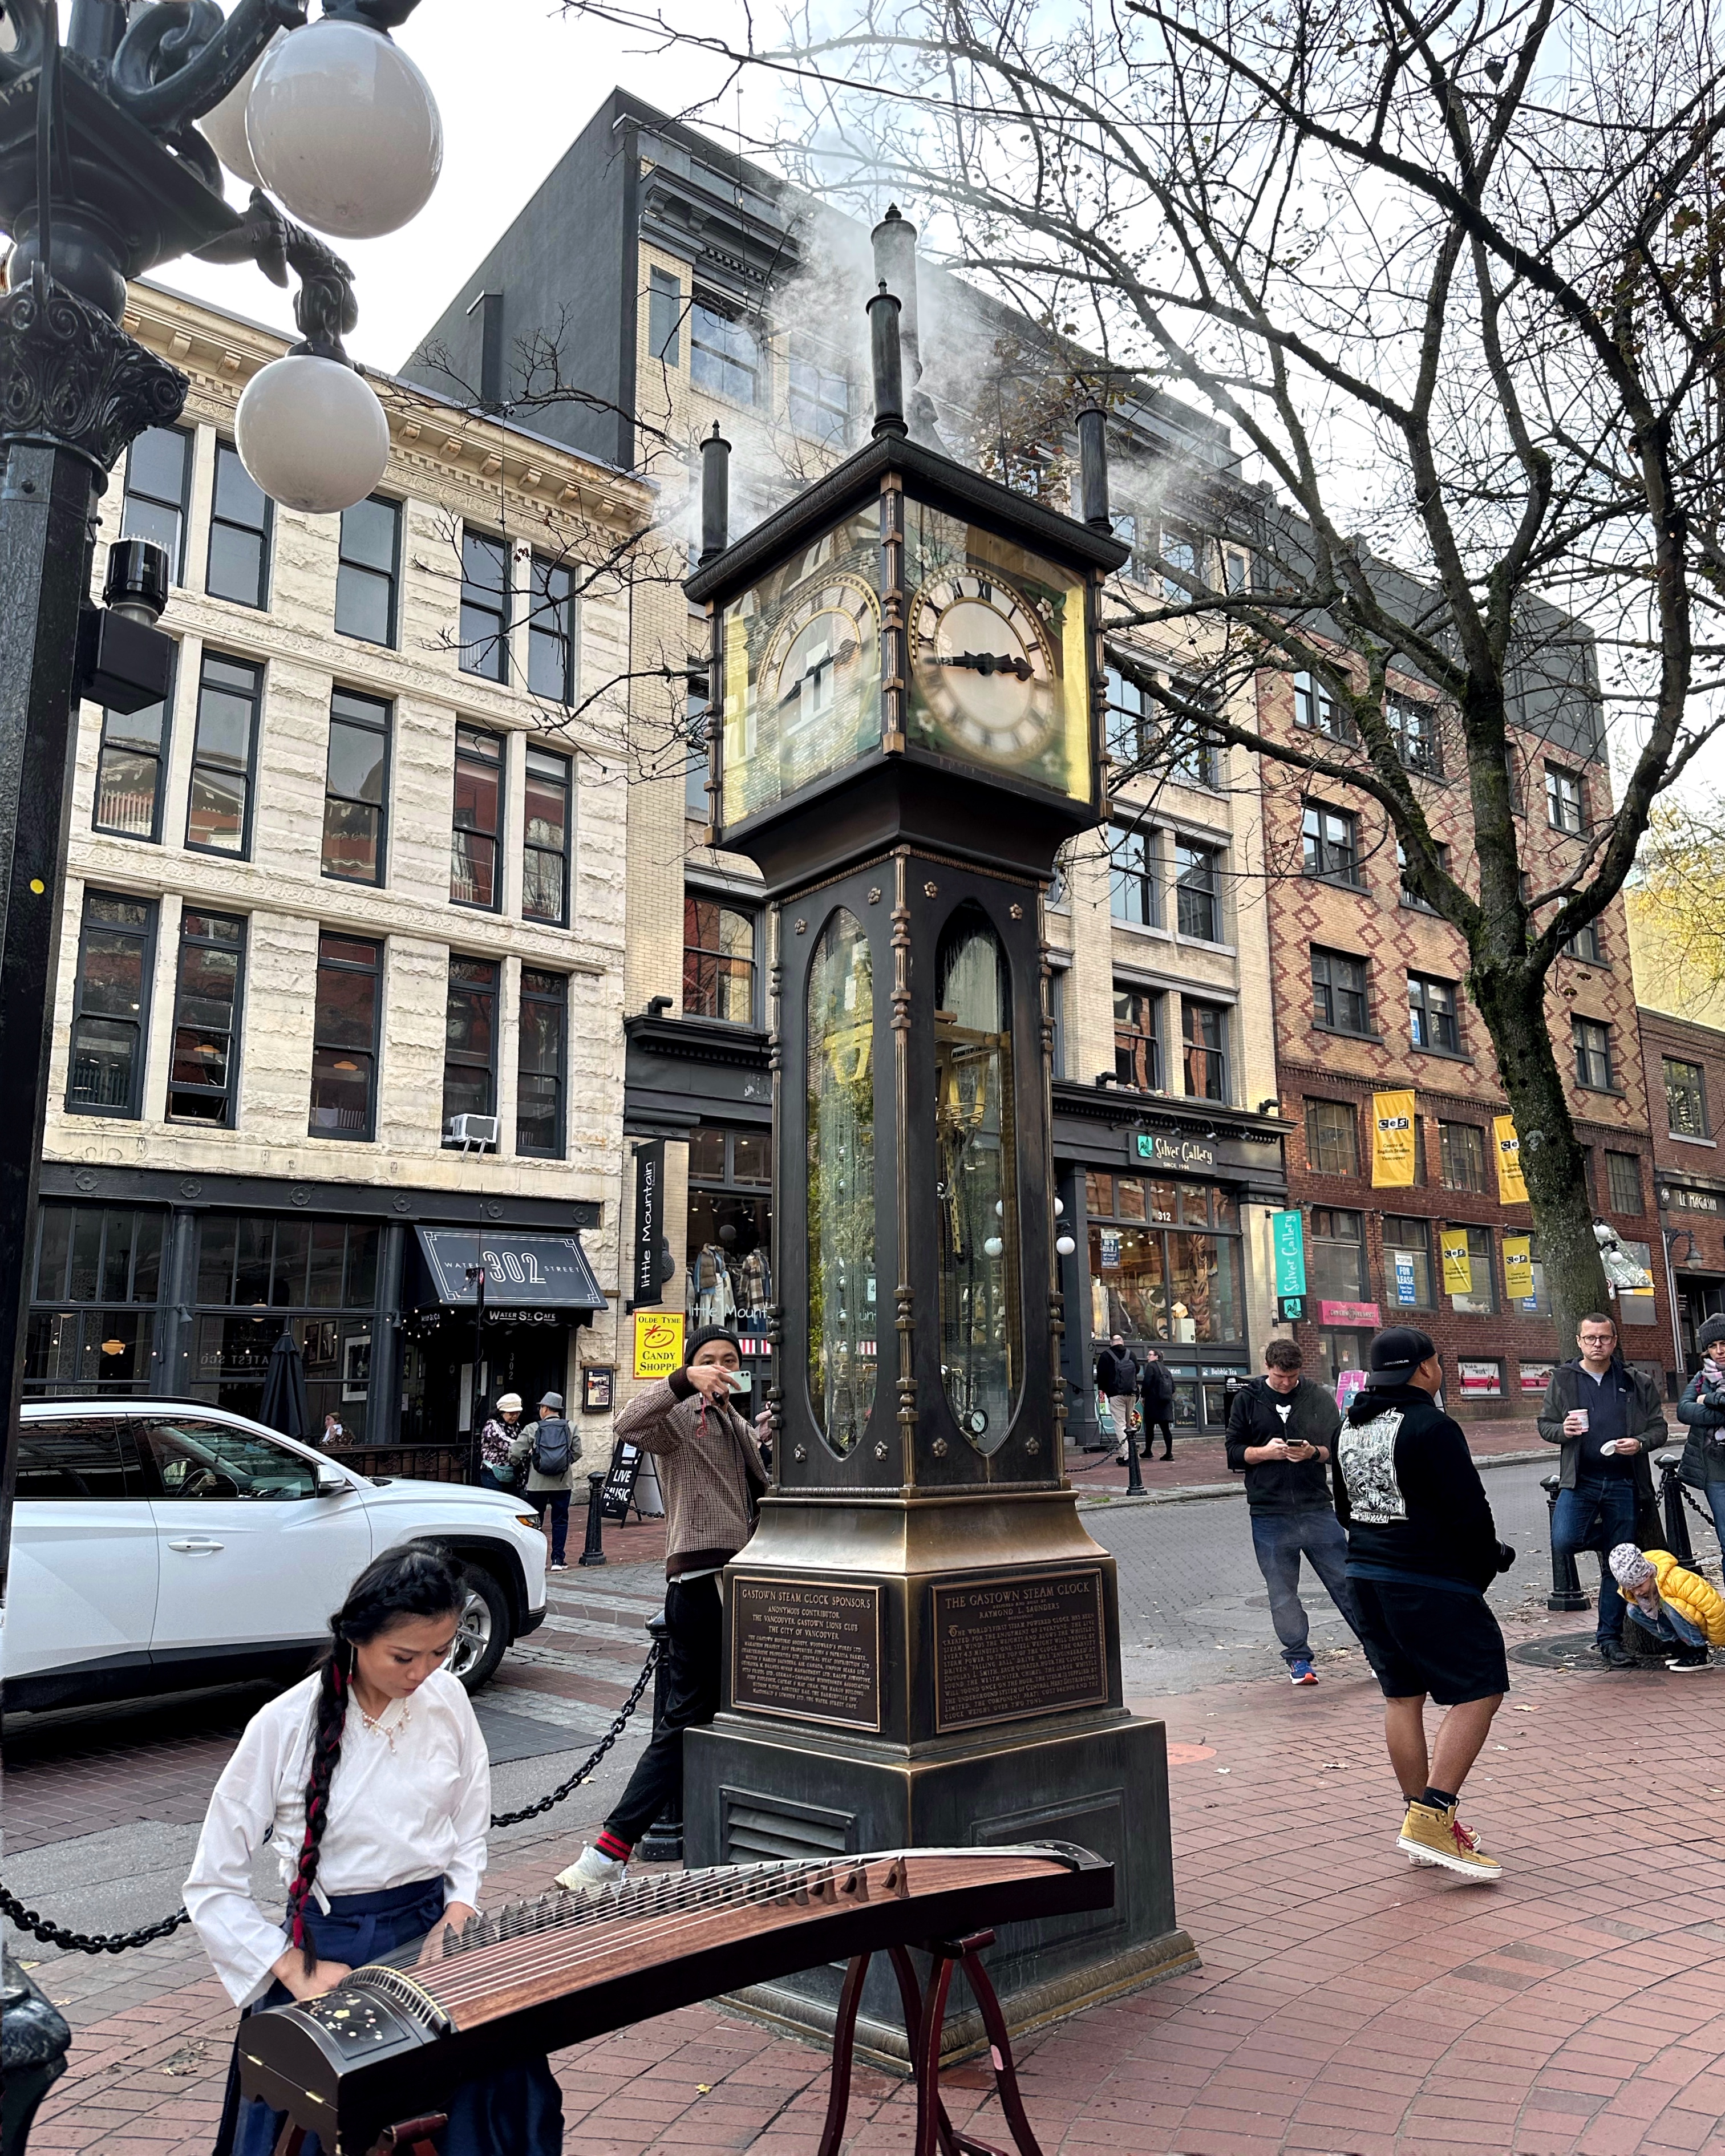 Things to do in Vancouver whistling steam clock Gastown